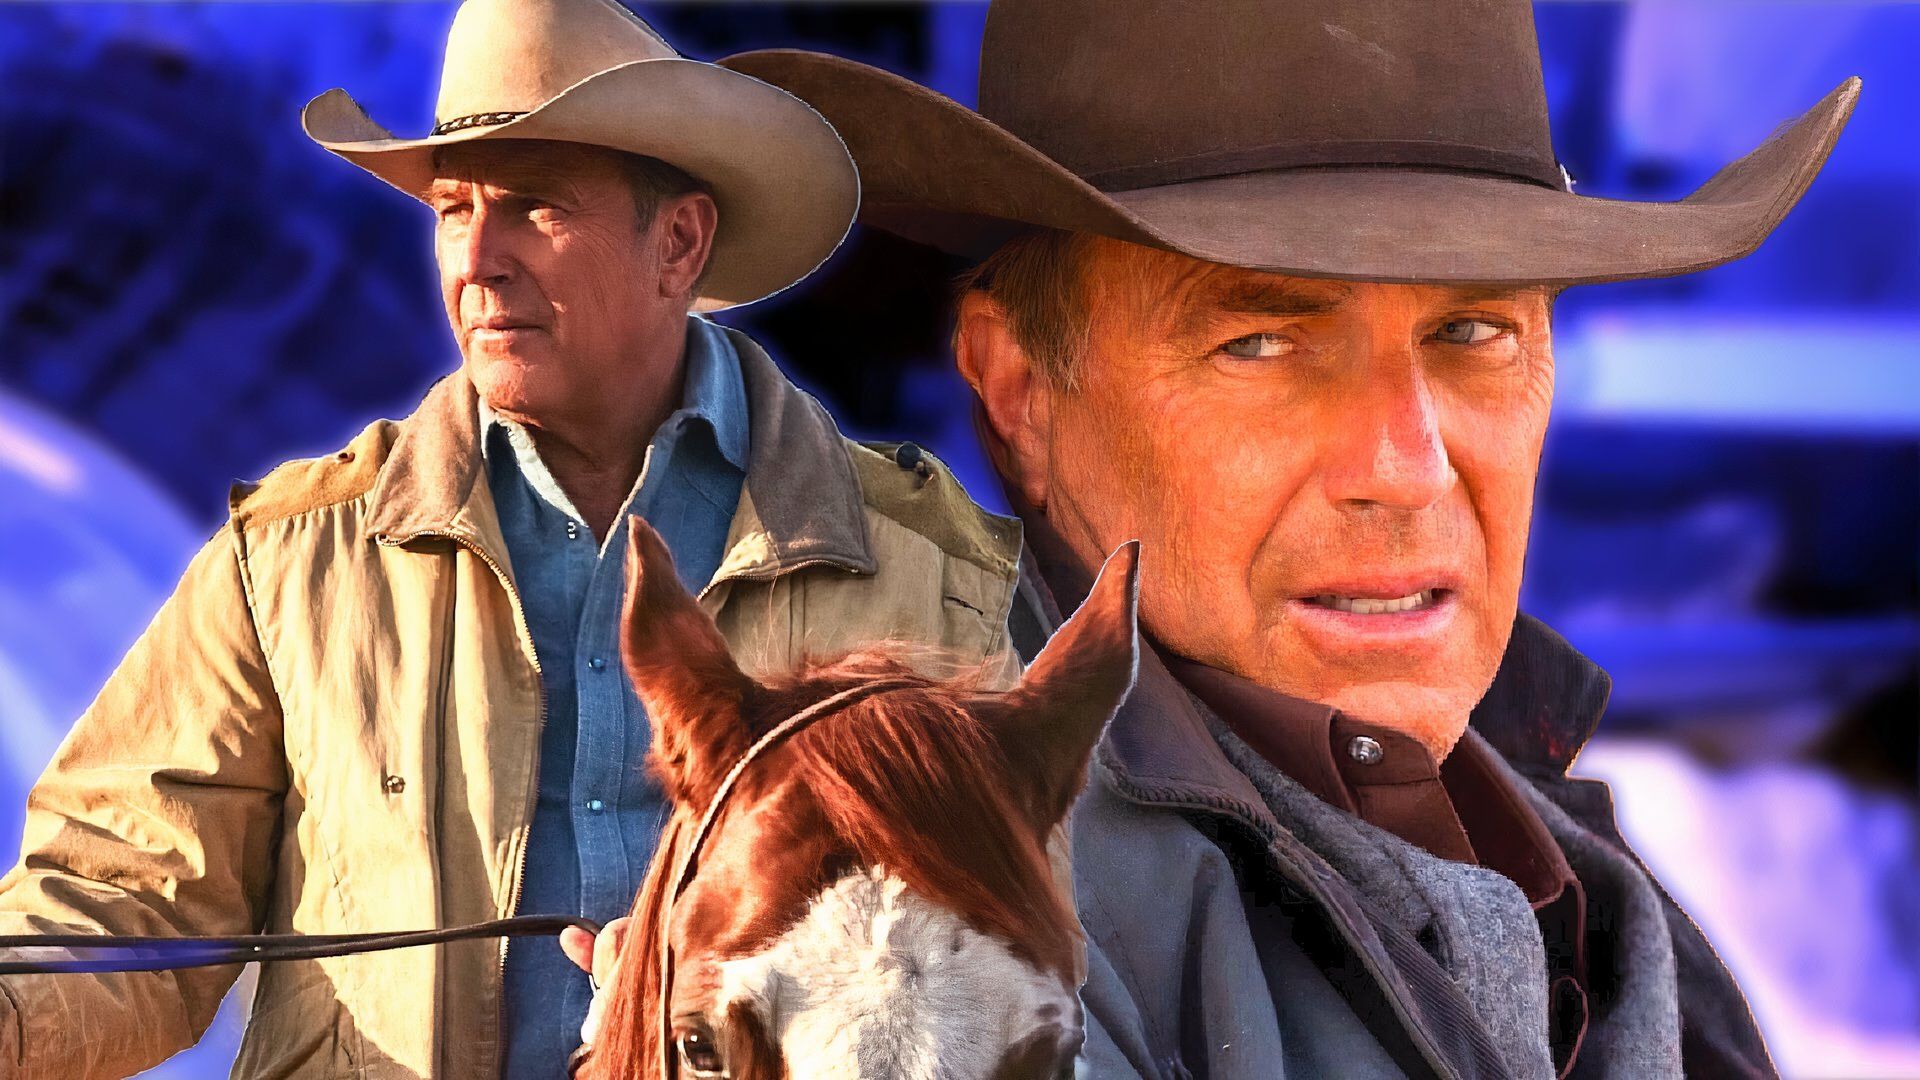 Kevin Costner in Yellowstone and on a horse